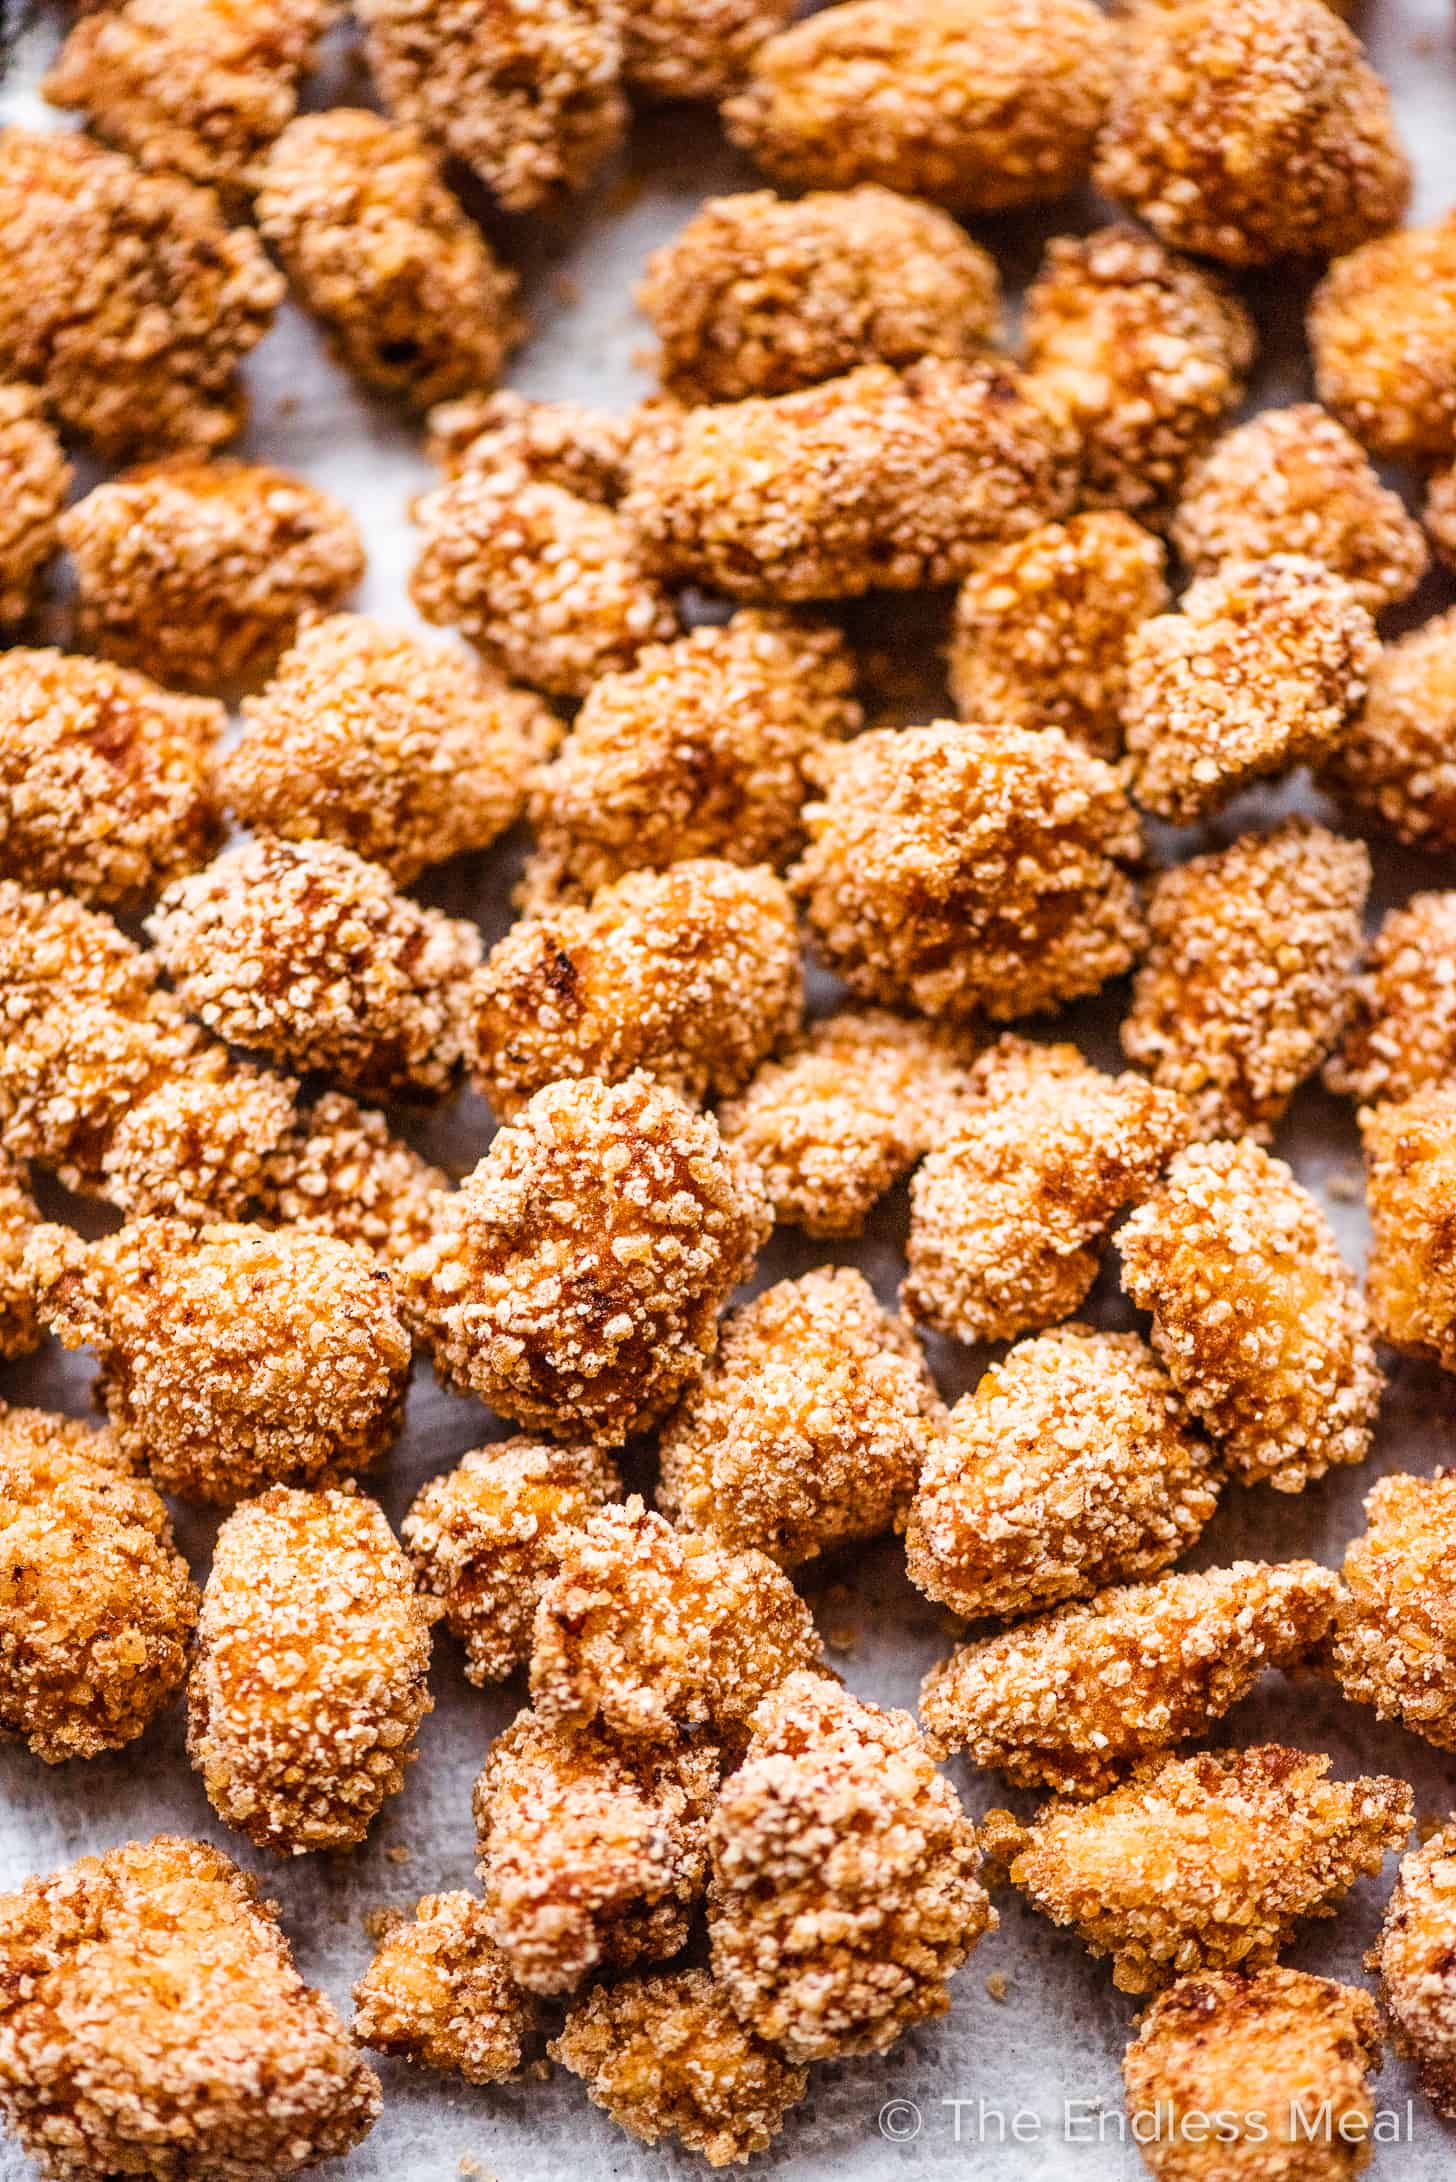 A close up of Fried Chicken Bites on a baking sheet.